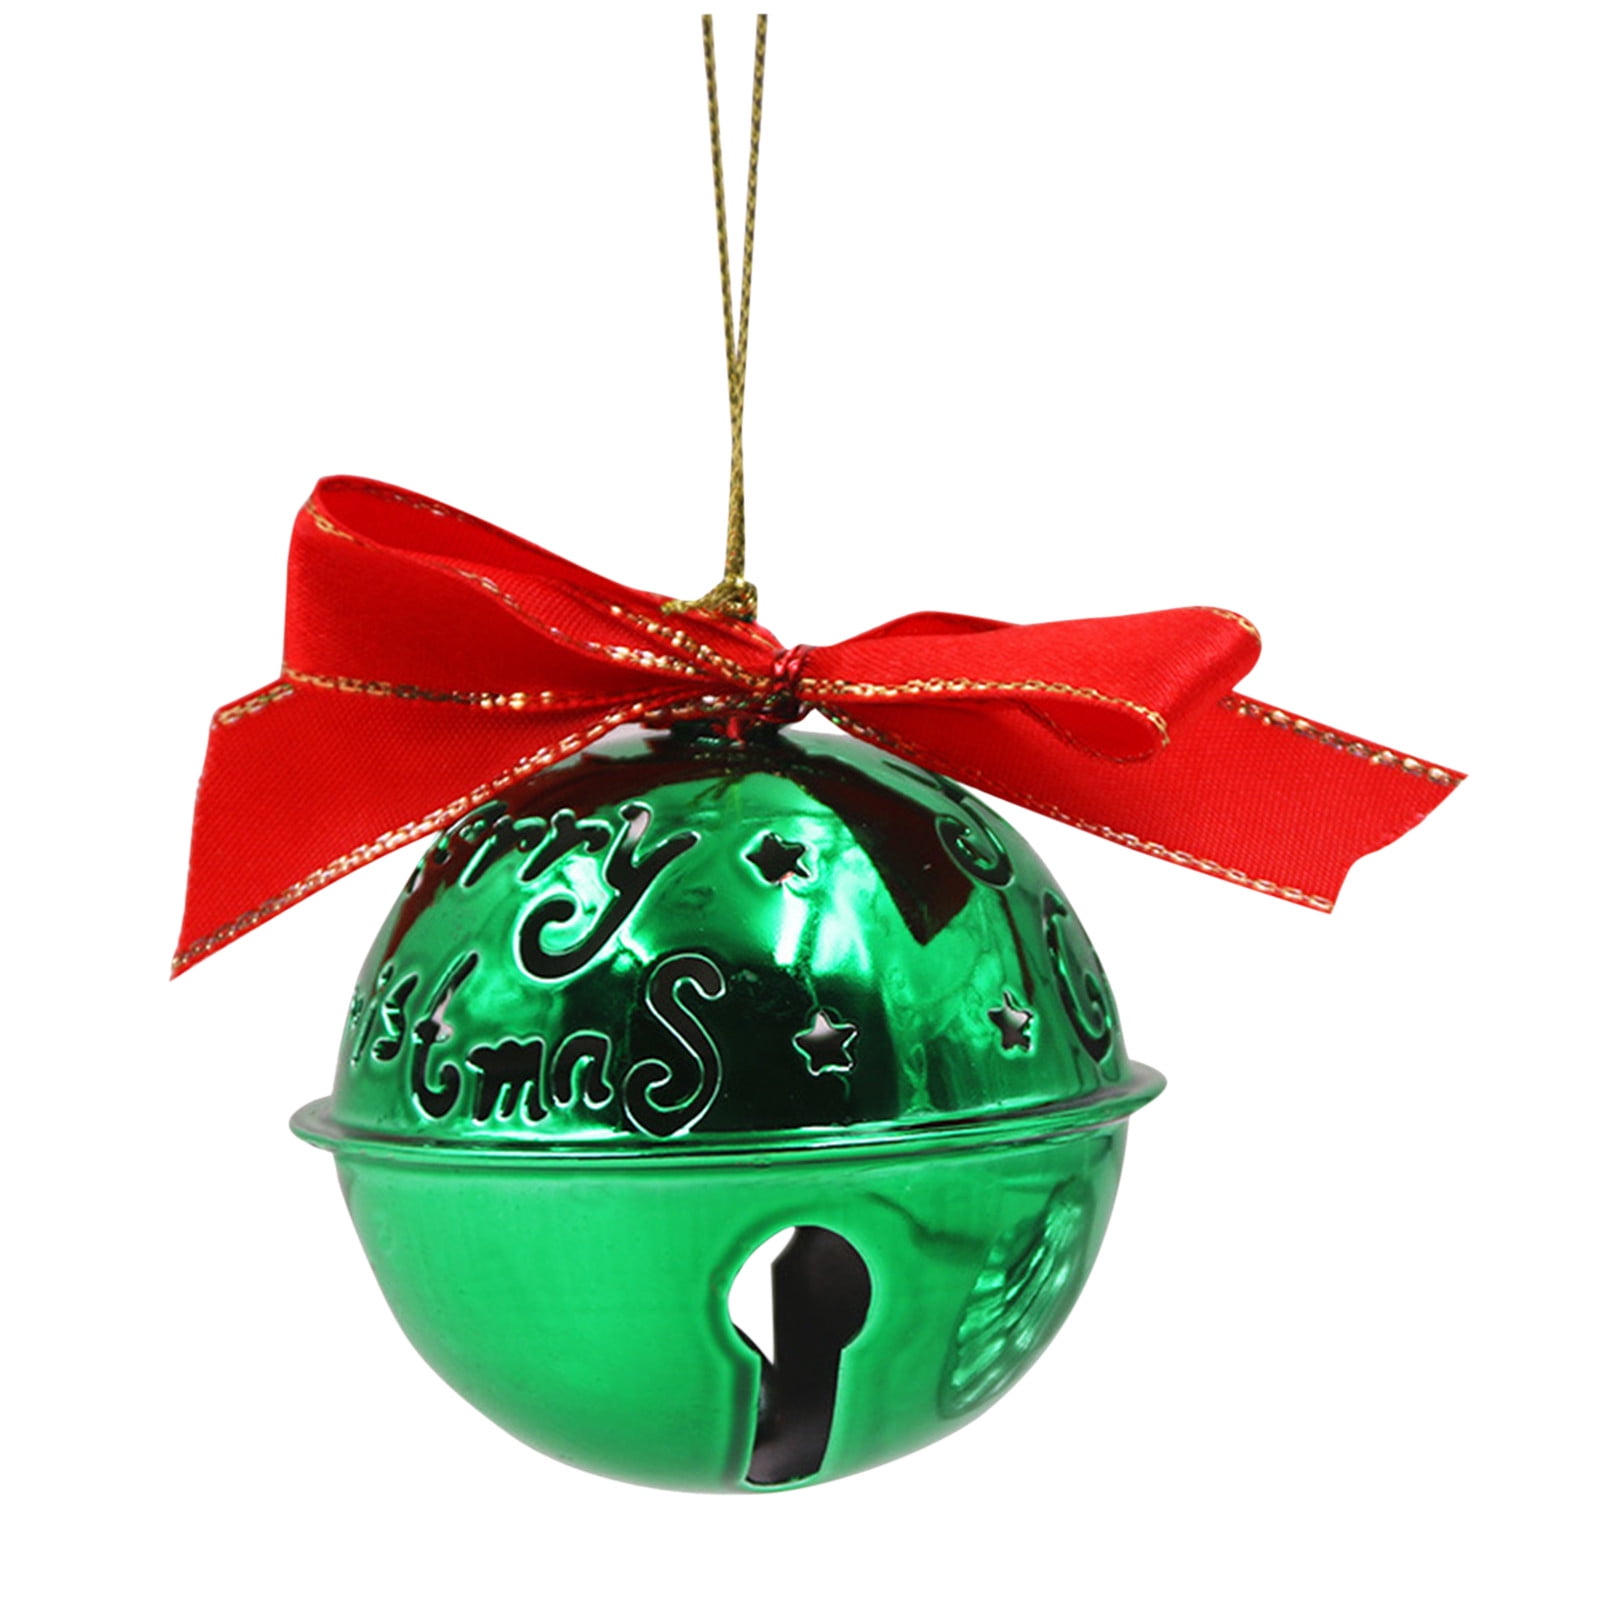 Northlight 7 in. White Metal Jingle Bell Hanging Christmas Decoration